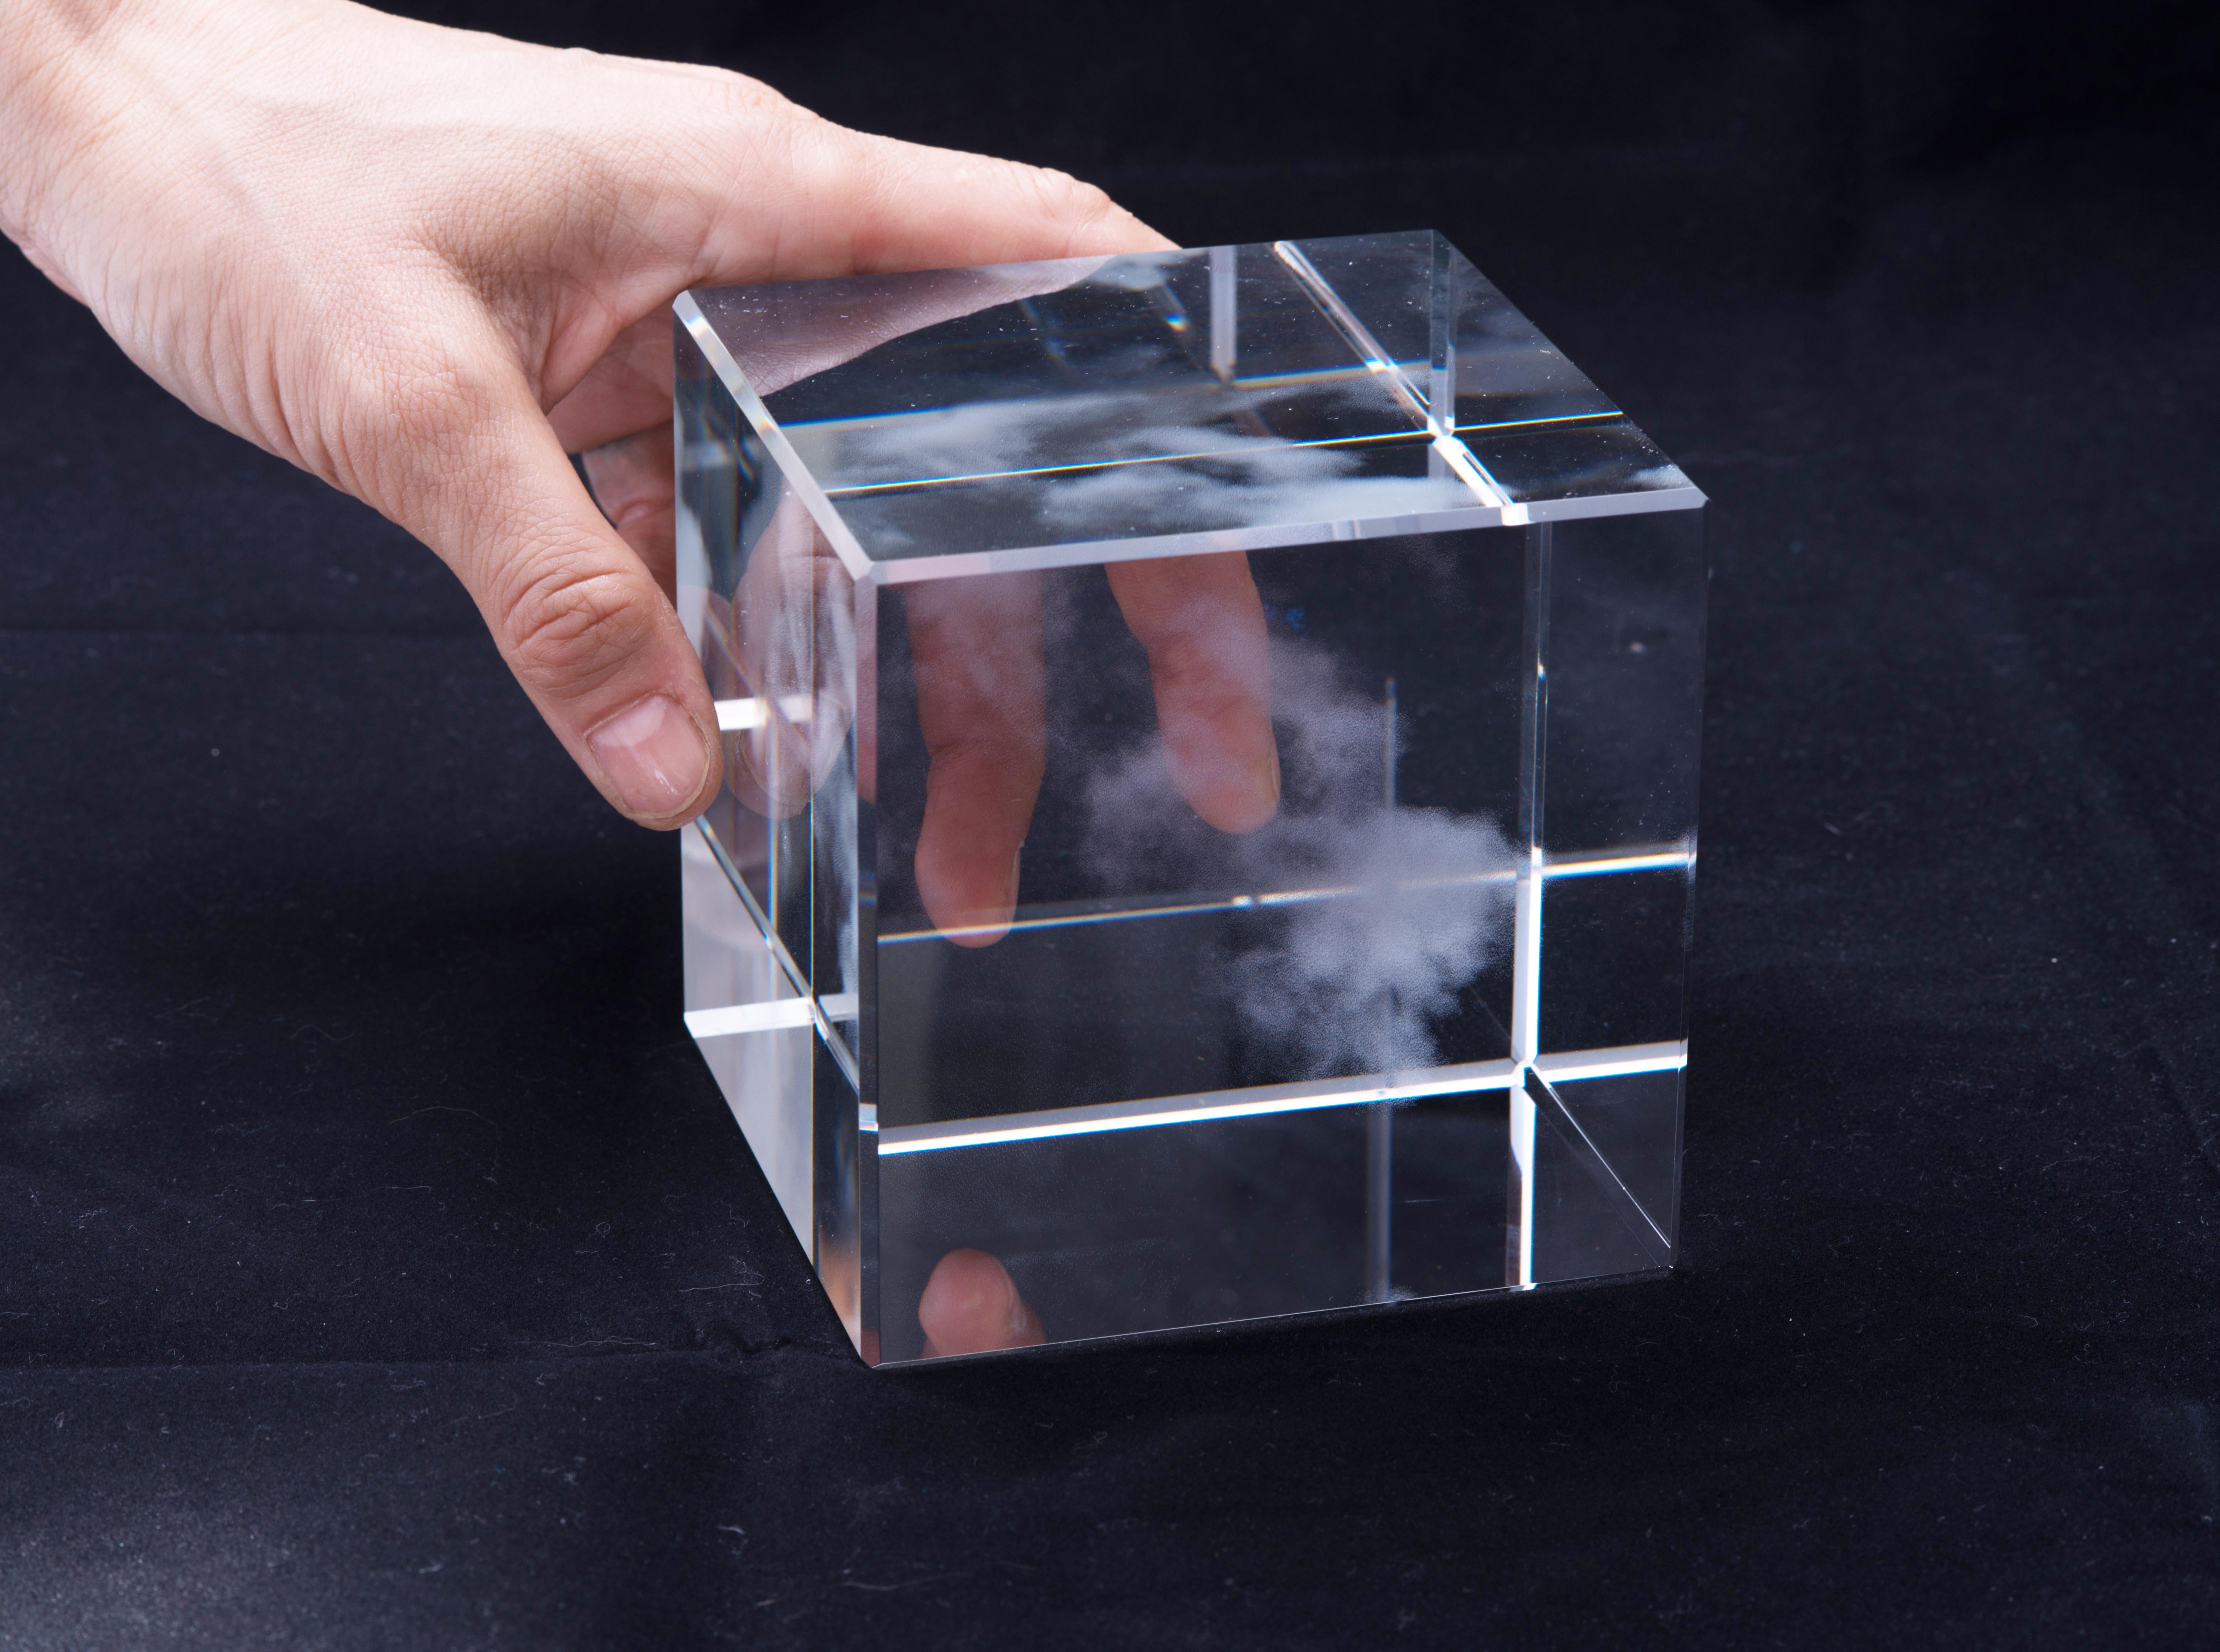 Miya ando.
Kumo (Cloud) for The Glass House (Shizen) Nature Series, 2016.
Glass measures:
4 in. x 4 in. x 4 in.
Edition of 15, 3 A/P’s.
Signed by artist.

 Shizen (Nature) Kumo (Cloud) for Glass House:

 The Kumo (Cloud) cube is a sculpture